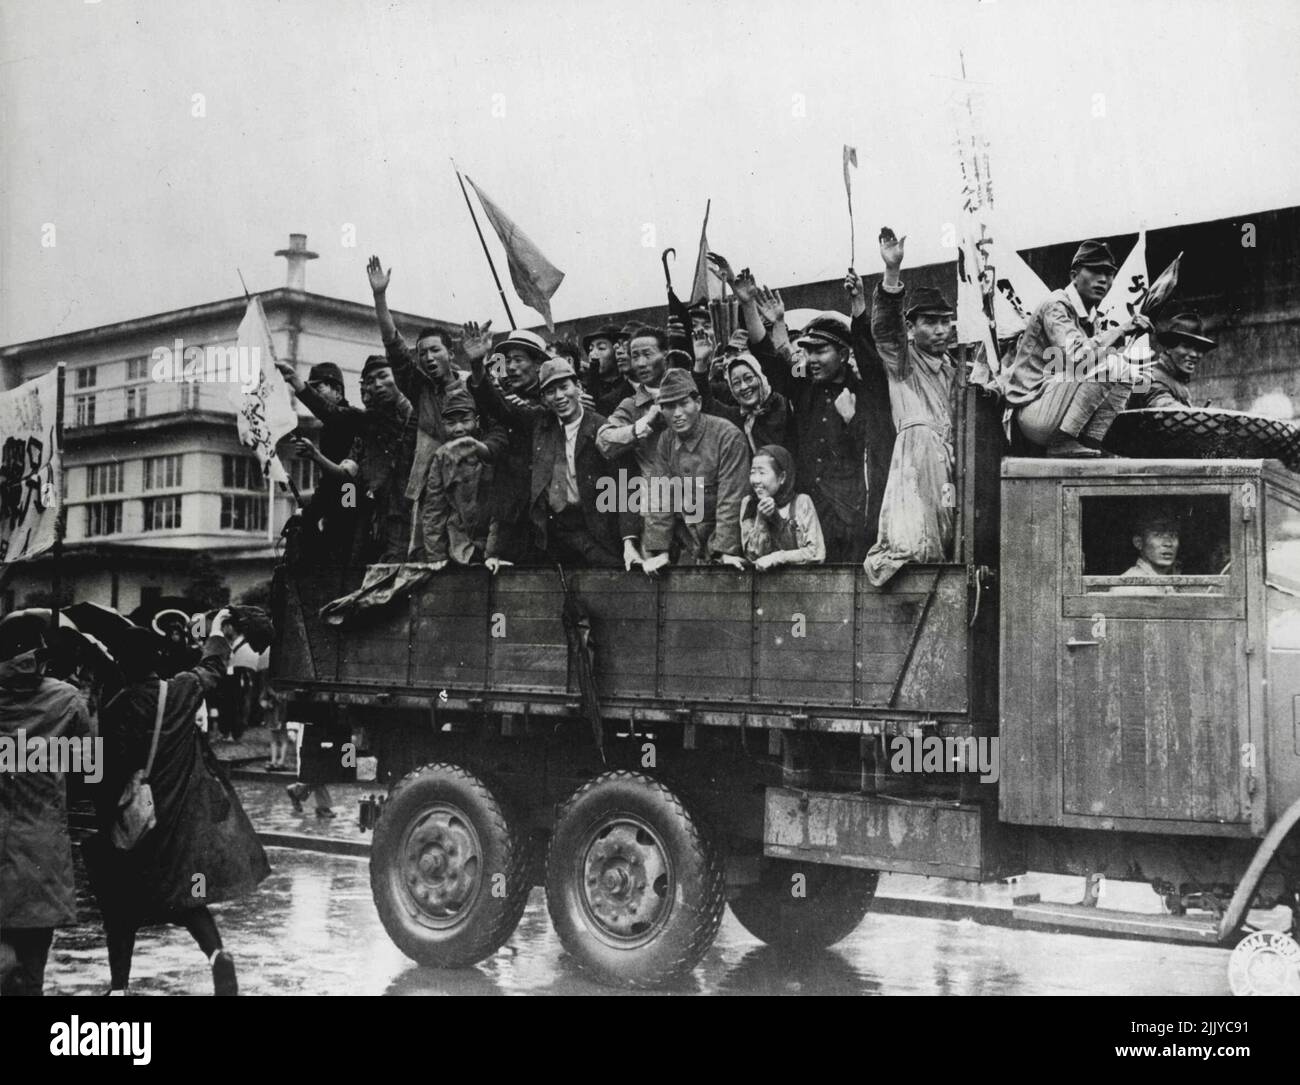 A result of the American occupation of Japan is the liberation of Korean political prisoners by the Japanese Government from Fuchu Prison outside Tokyo. A demonstration greeted the freed prisoners, some of whom had bean imprisoned for as long as 18 years for communistic tendencies. November 9, 1945. (Photo by US Army Signal Corps Photo). Stock Photo